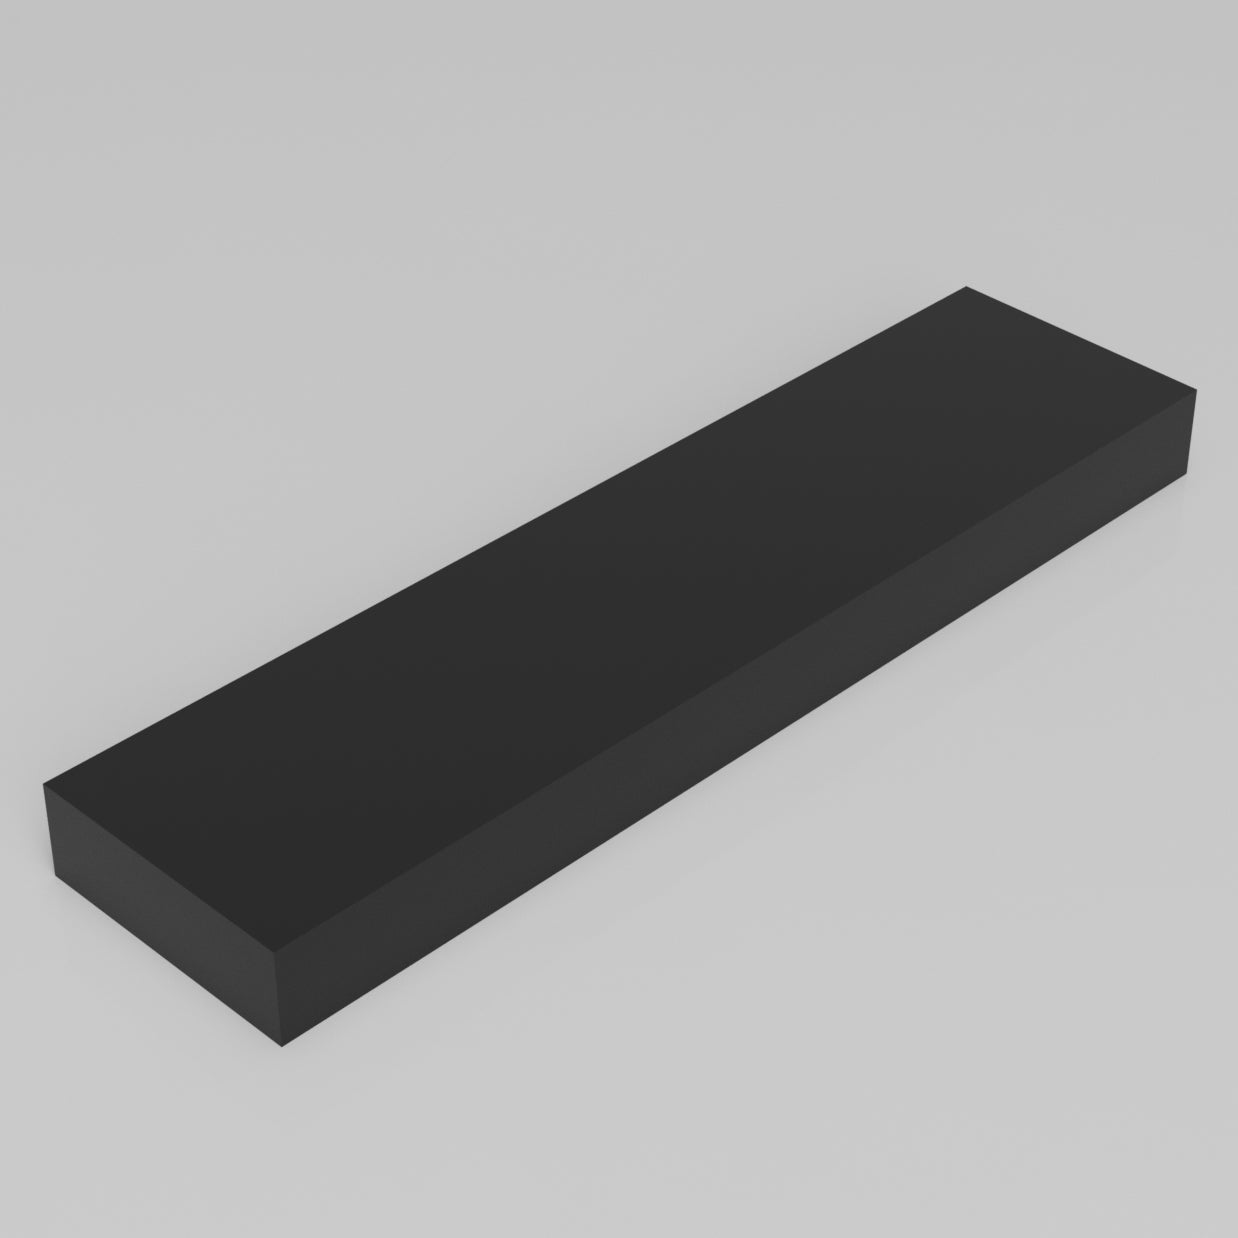 Machinable Wax Rectangular Block Front View 1 Inch by 3 Inch by 1+2 Inch